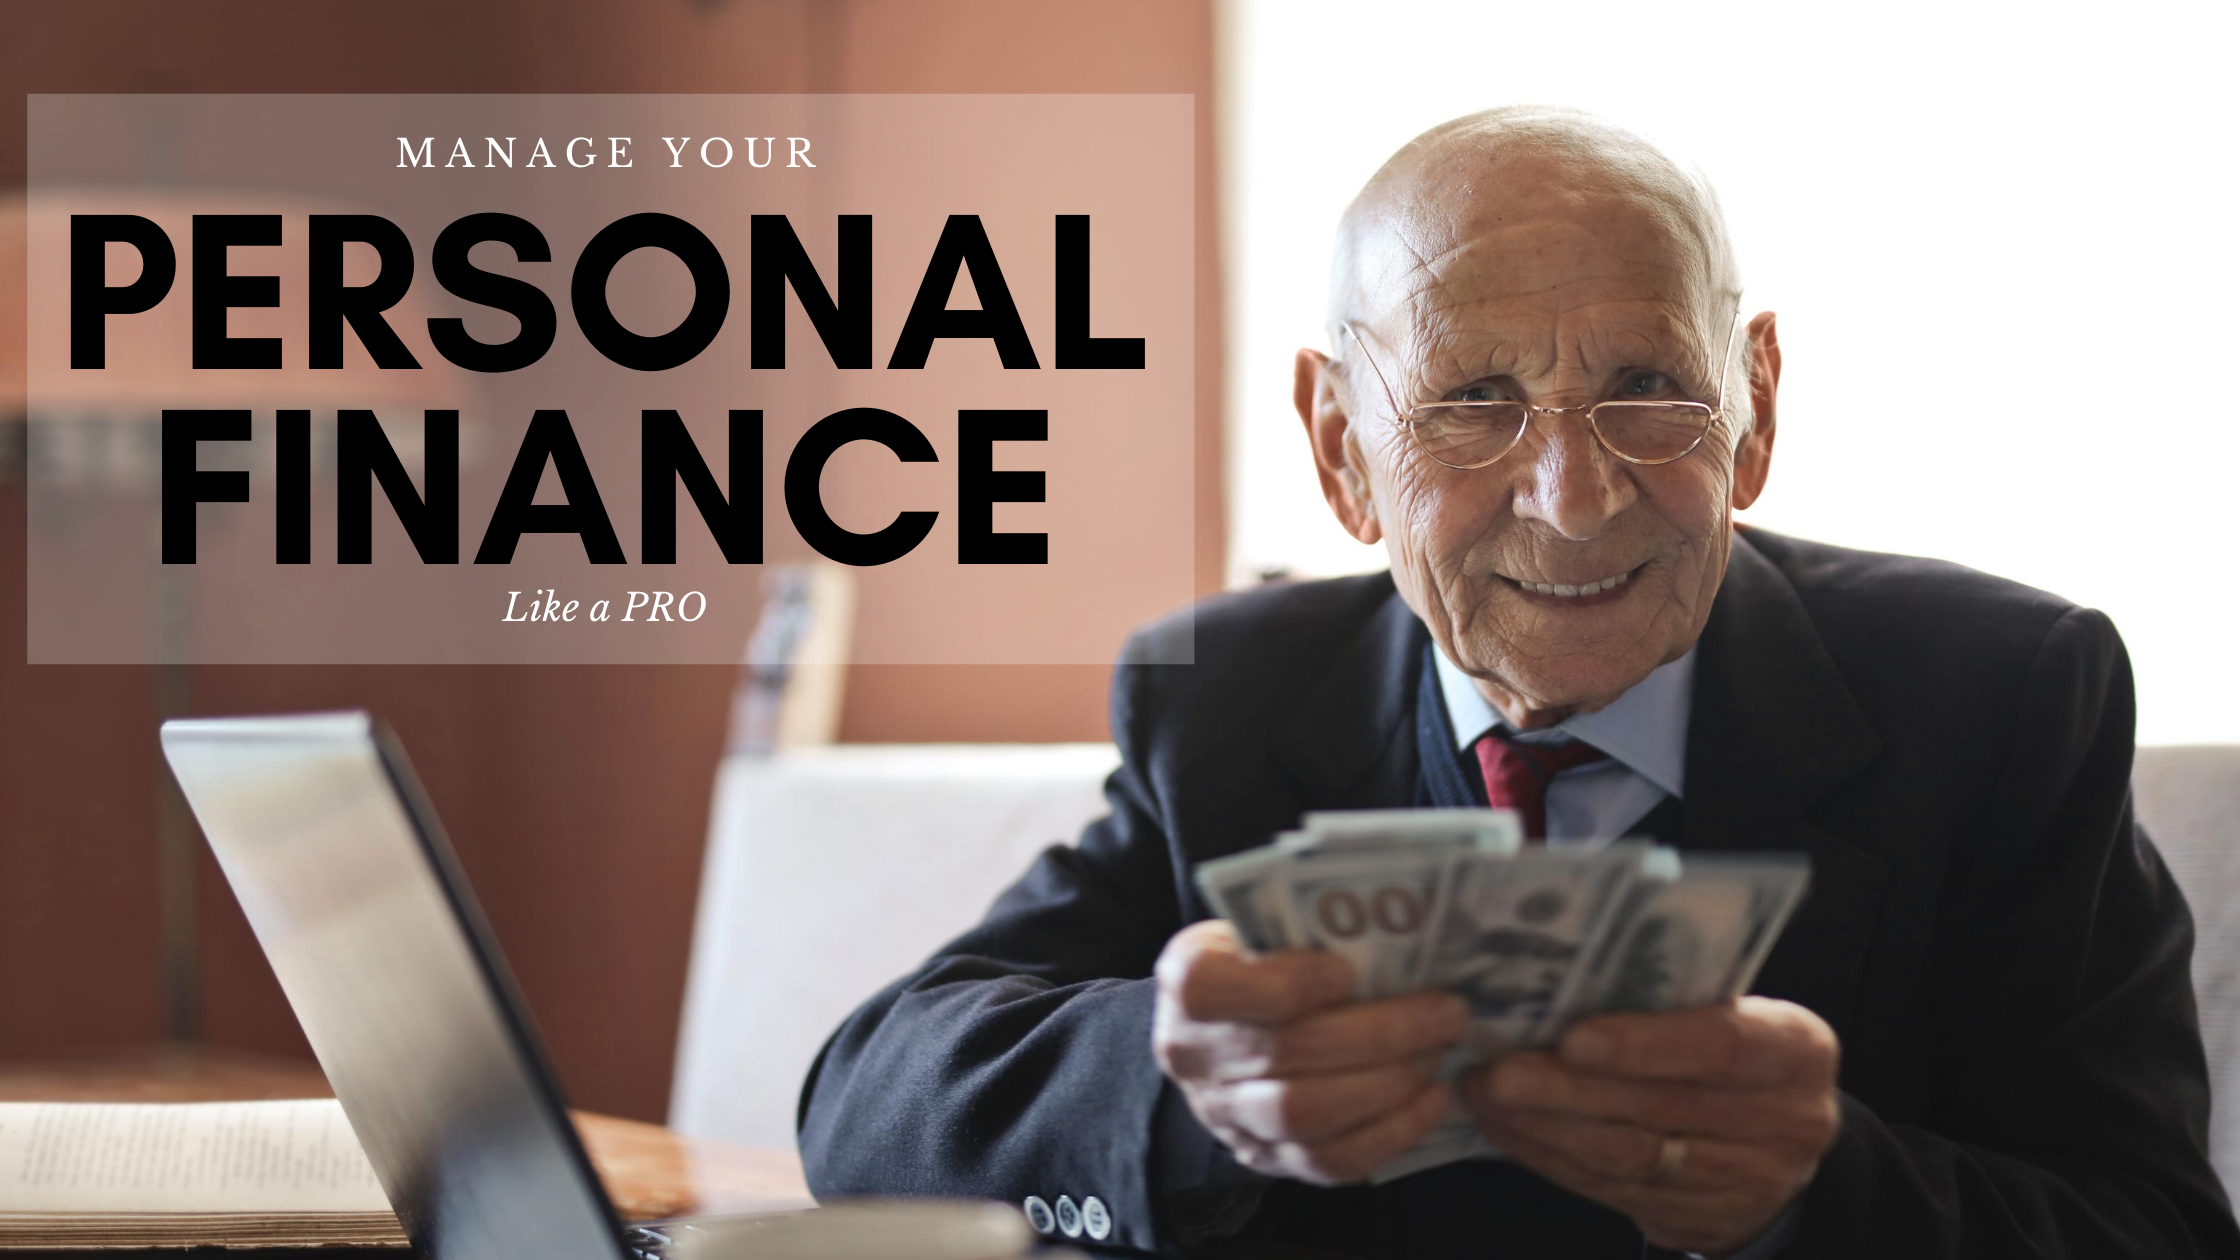 Manage Your Personal Finance Like a Pro